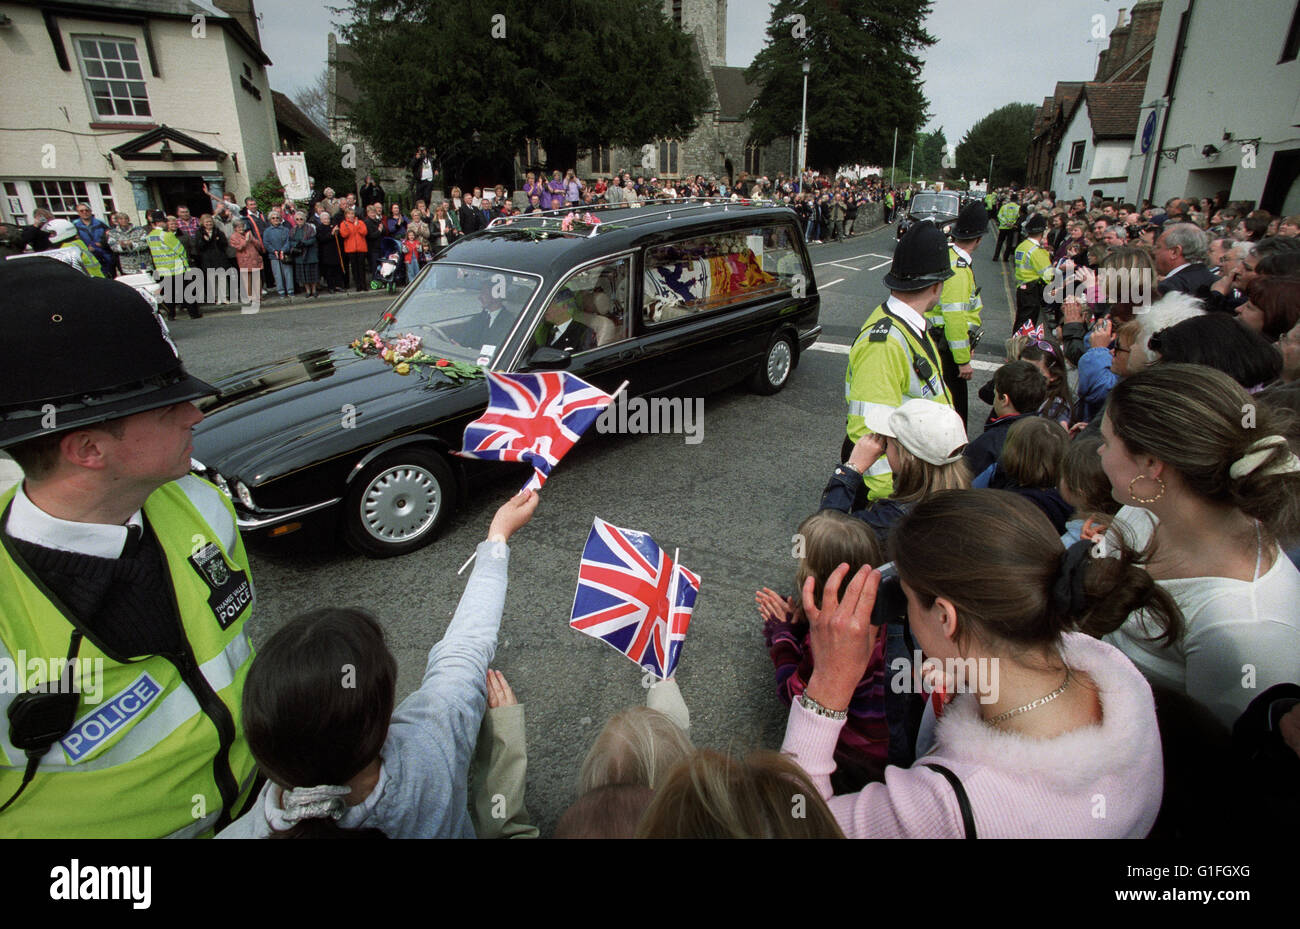 Funeral of HM the Queen Mother who died at 101 years of age of 30 March 2002. The funeral took place on 9 April 2002. Seen here passing through Datchet in the Royal Borough of Windsor and Maidenhead in Berkshire, en route to Windsor Castle .NEW scans made in 2016 Stock Photo